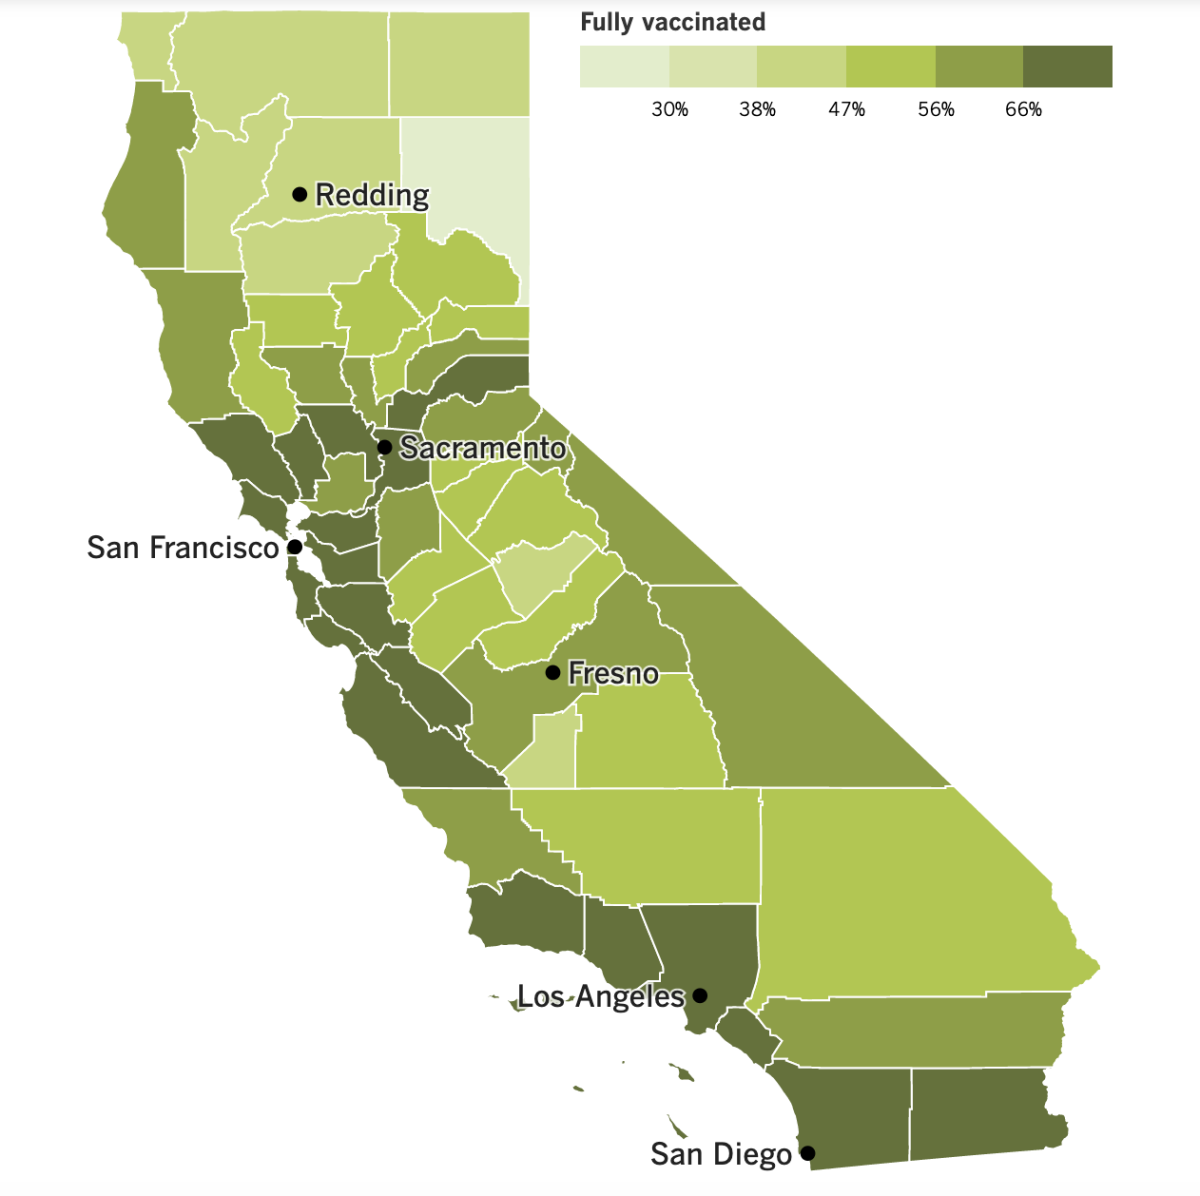 A map showing California's vaccination progress by county, as of Jan. 21.